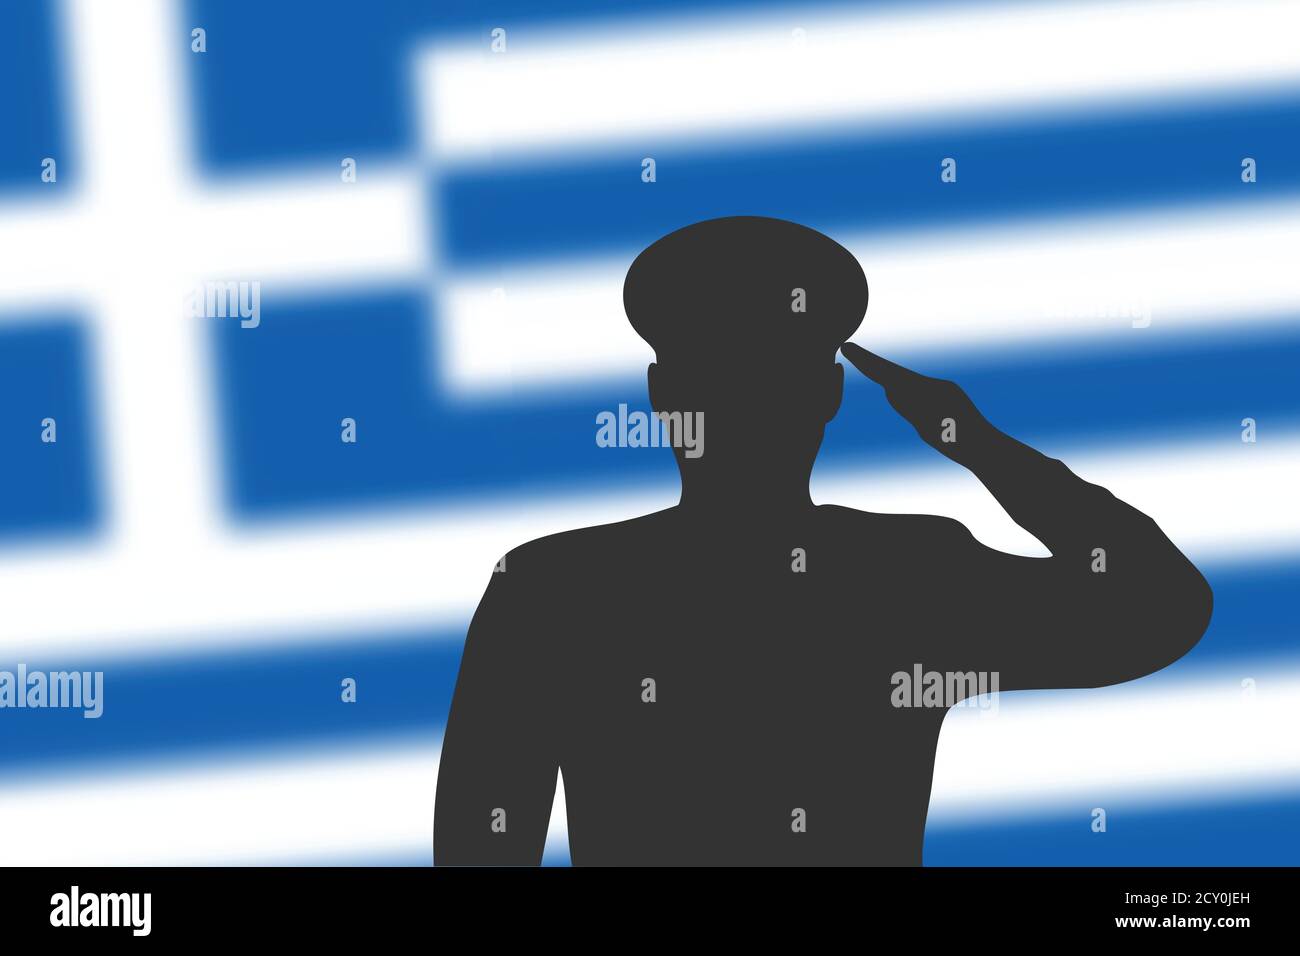 Solder silhouette on blur background with Greece flag. Stock Vector